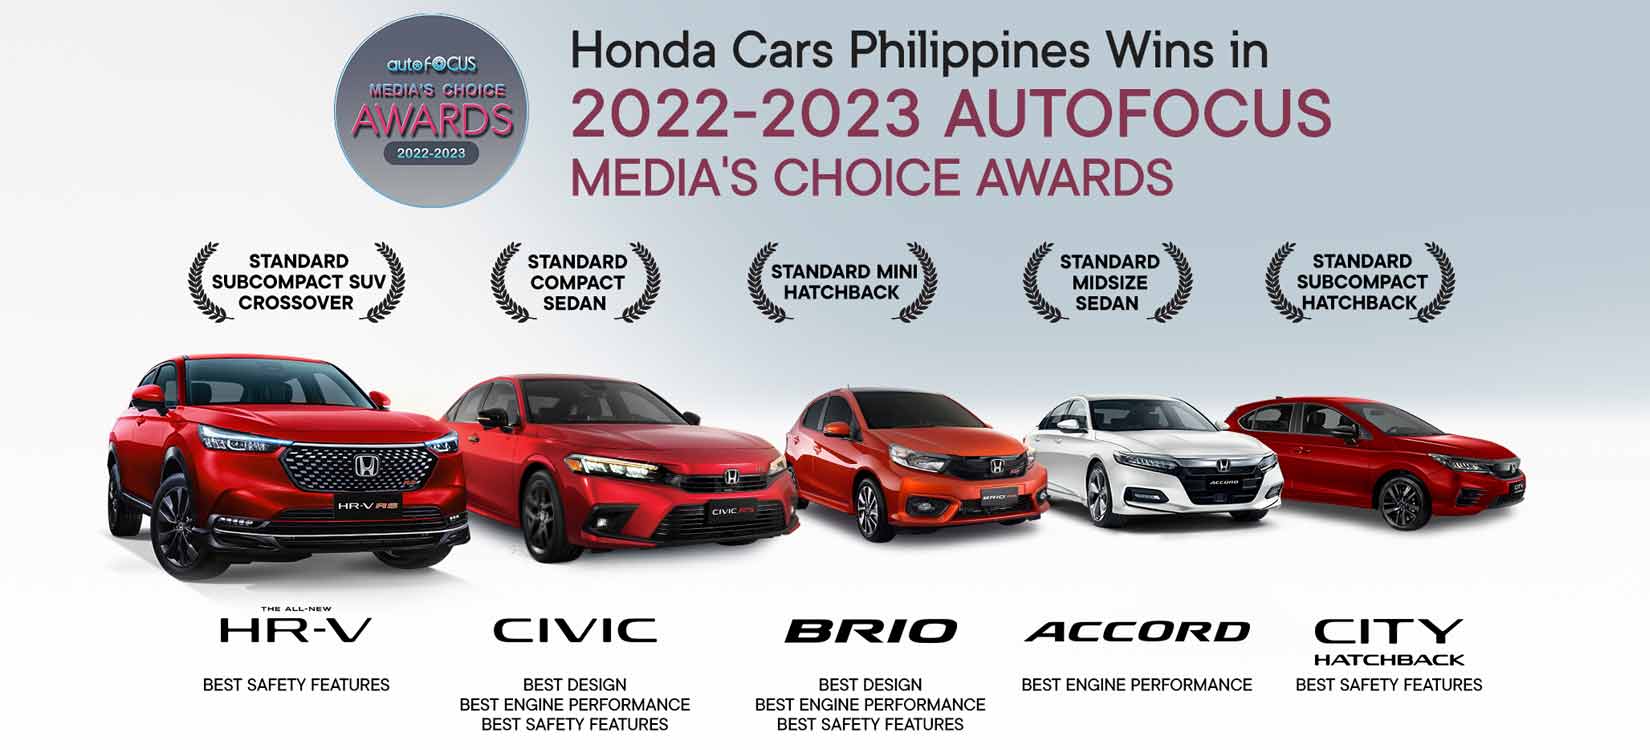 Honda brings home awards for design, performance and safety at the 2022-2023 Auto Focus People’s & Media’s Choice Awards